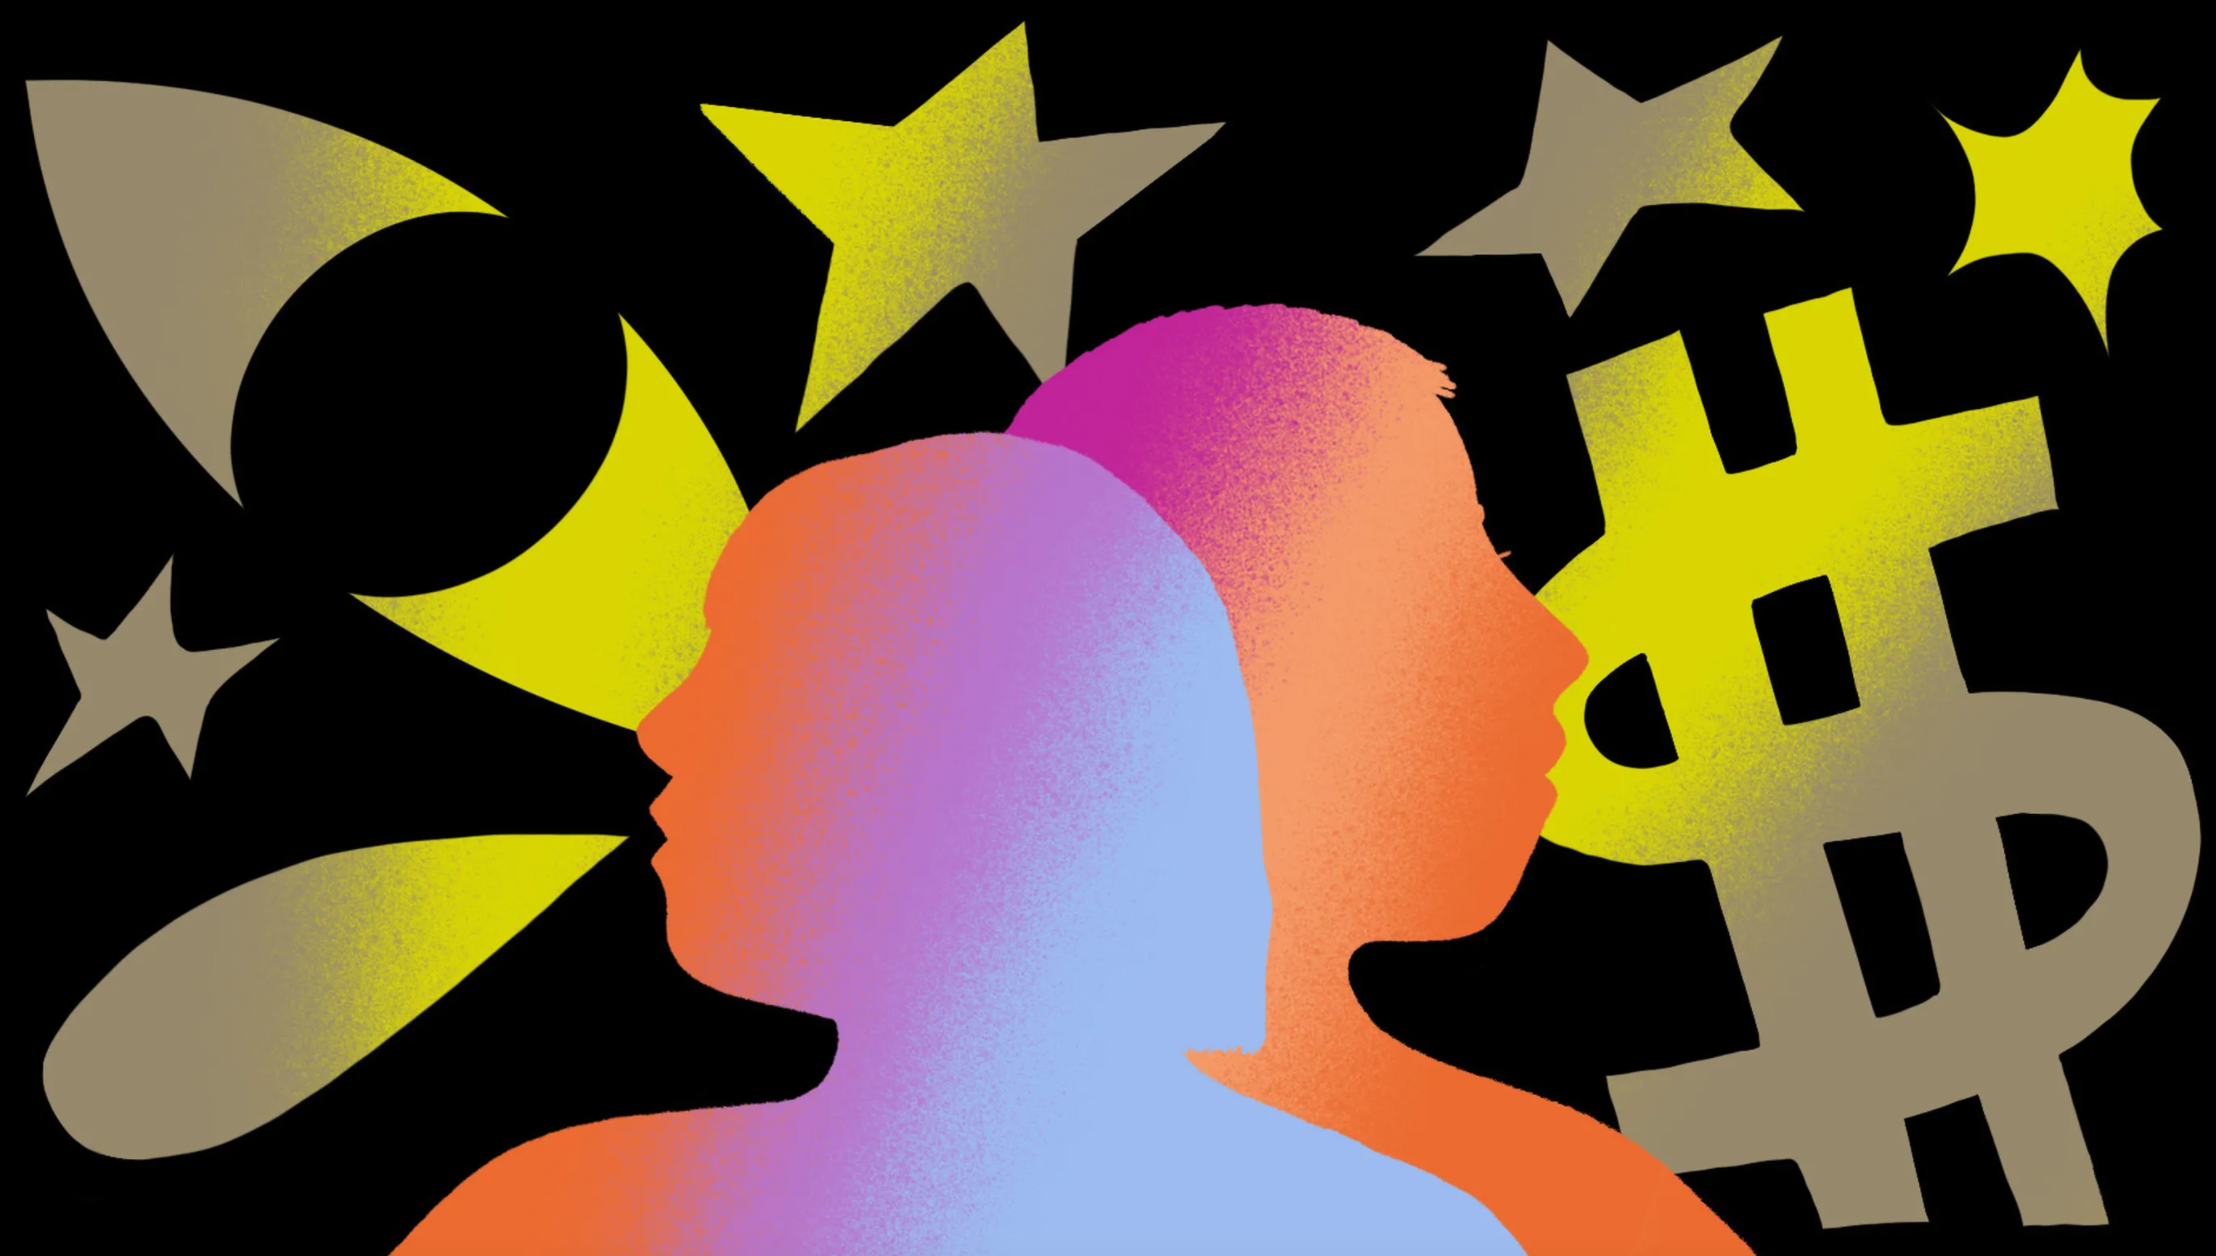 Illustration of two people’s heads in profile against a background of a dollar sign and stars.